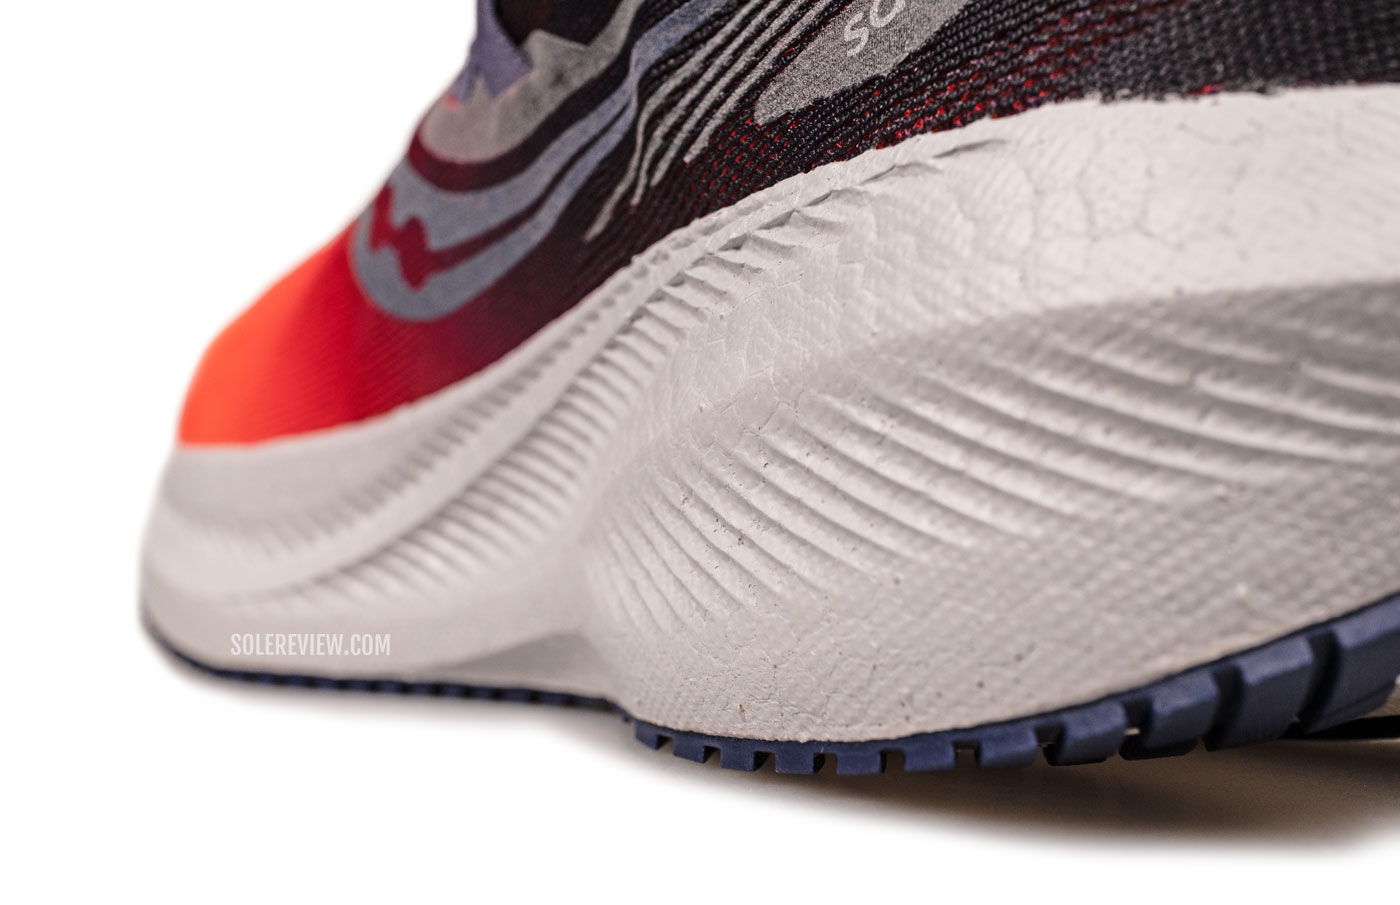 The midsole sidewalls of the Saucony Triumph 20.